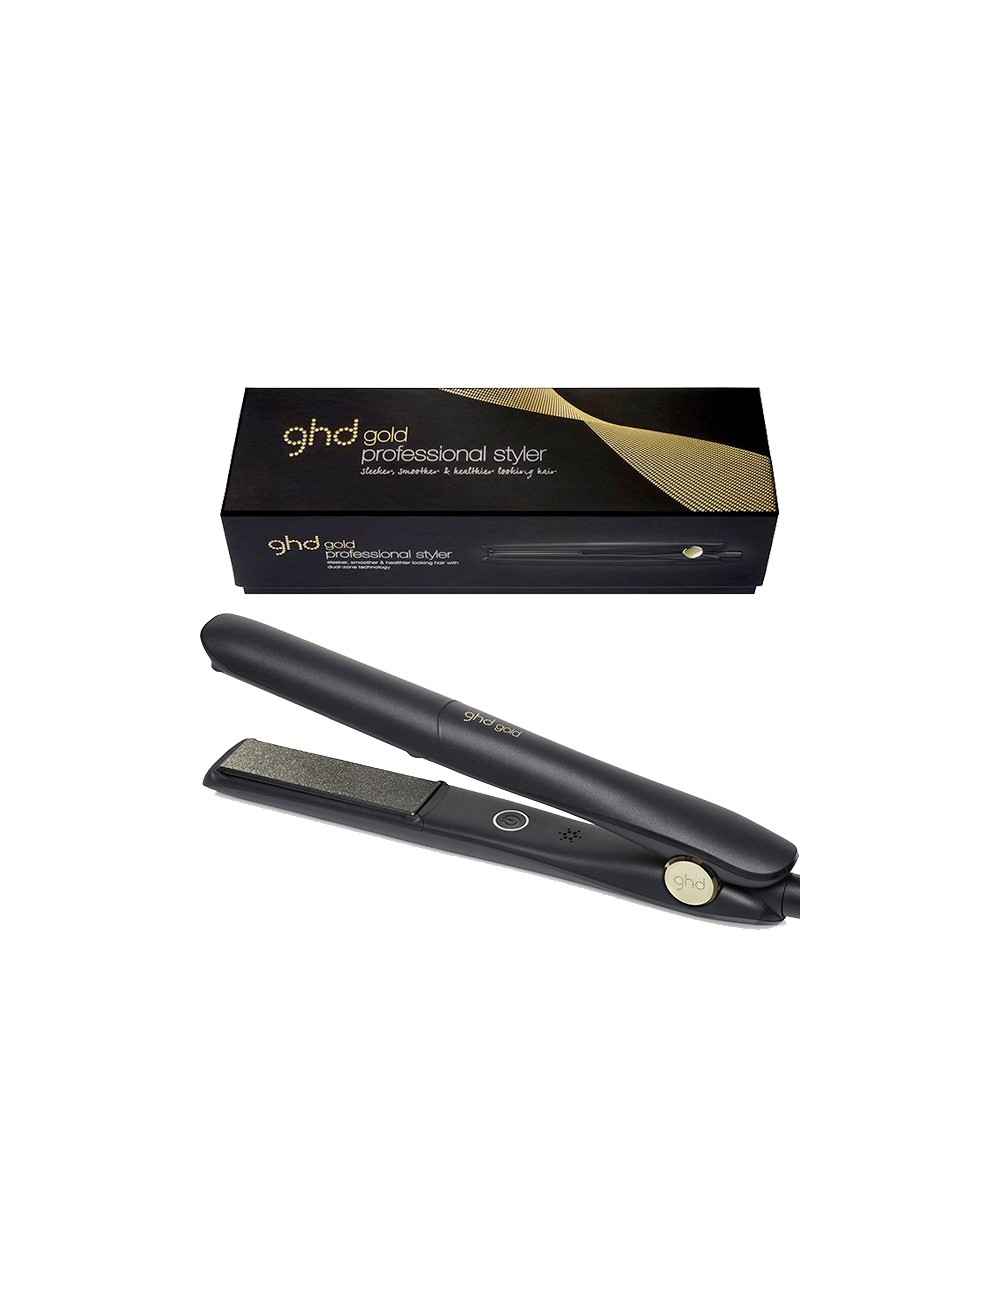 Ghd gold piastra professionale